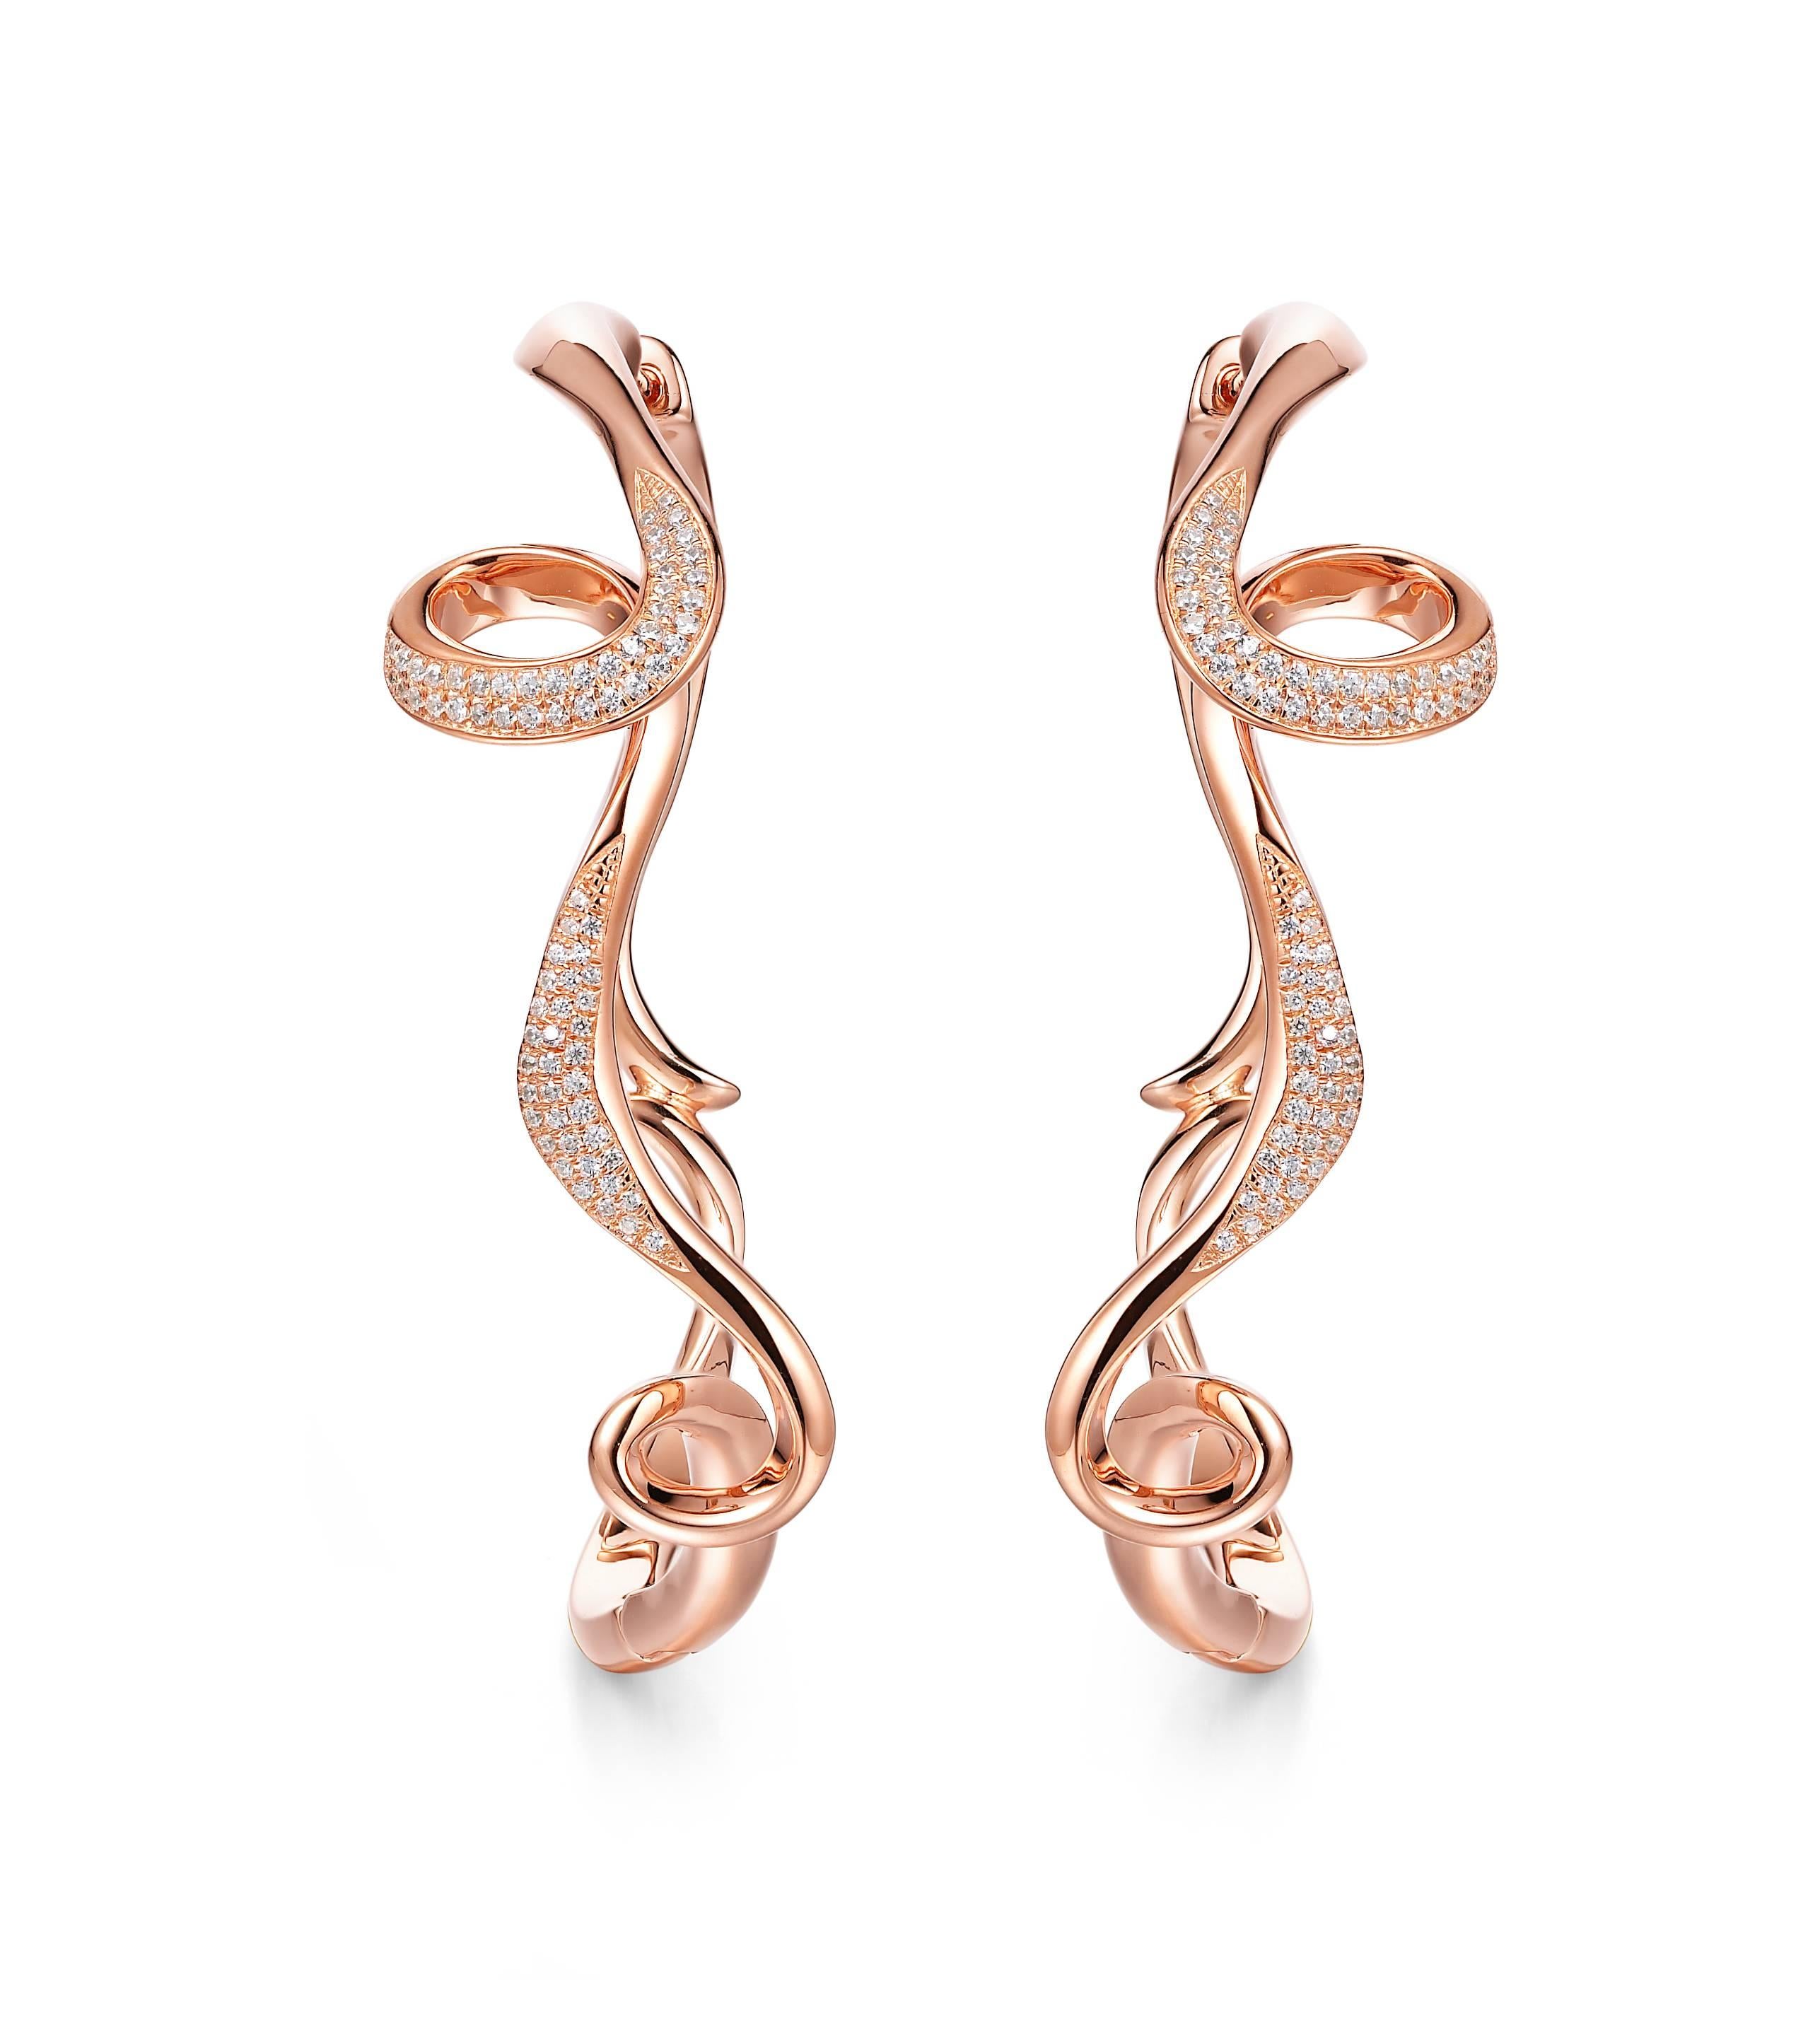 Description:
Serenity large hoops with white cubic zirconia, set in 18ct rose gold plate on sterling silver.

Inspiration:
Serenity is a collection in sterling silver, inspired by the flow and curves of the smoke of incense. Promoting a calm and